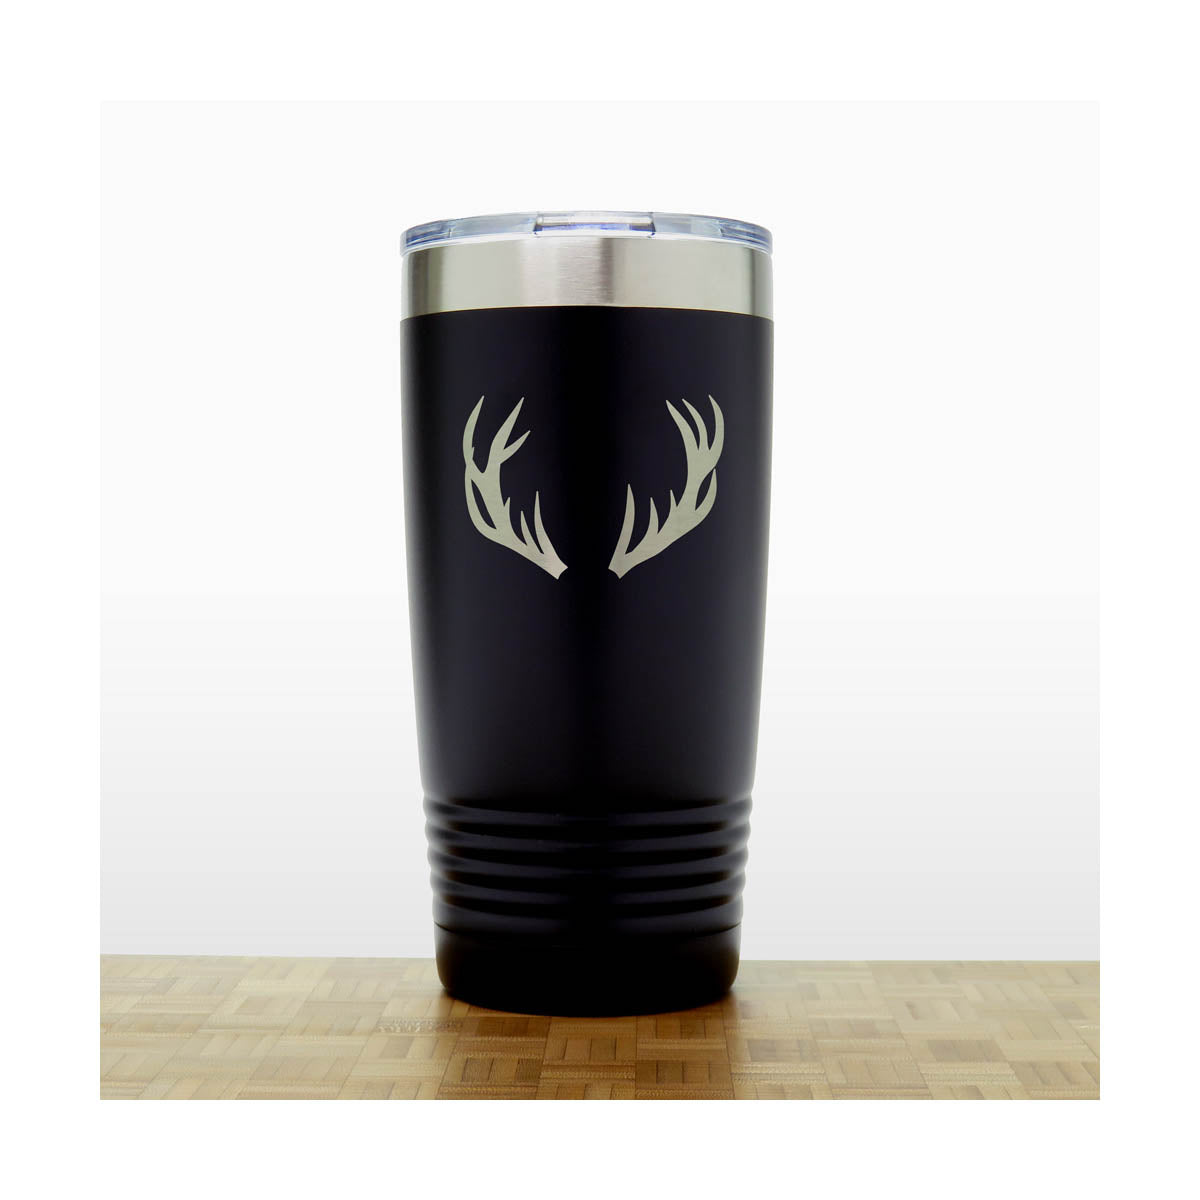 Black - Deer Antlers 20 oz Insulated Tumbler - Design 2 - Copyright Hues in Glass